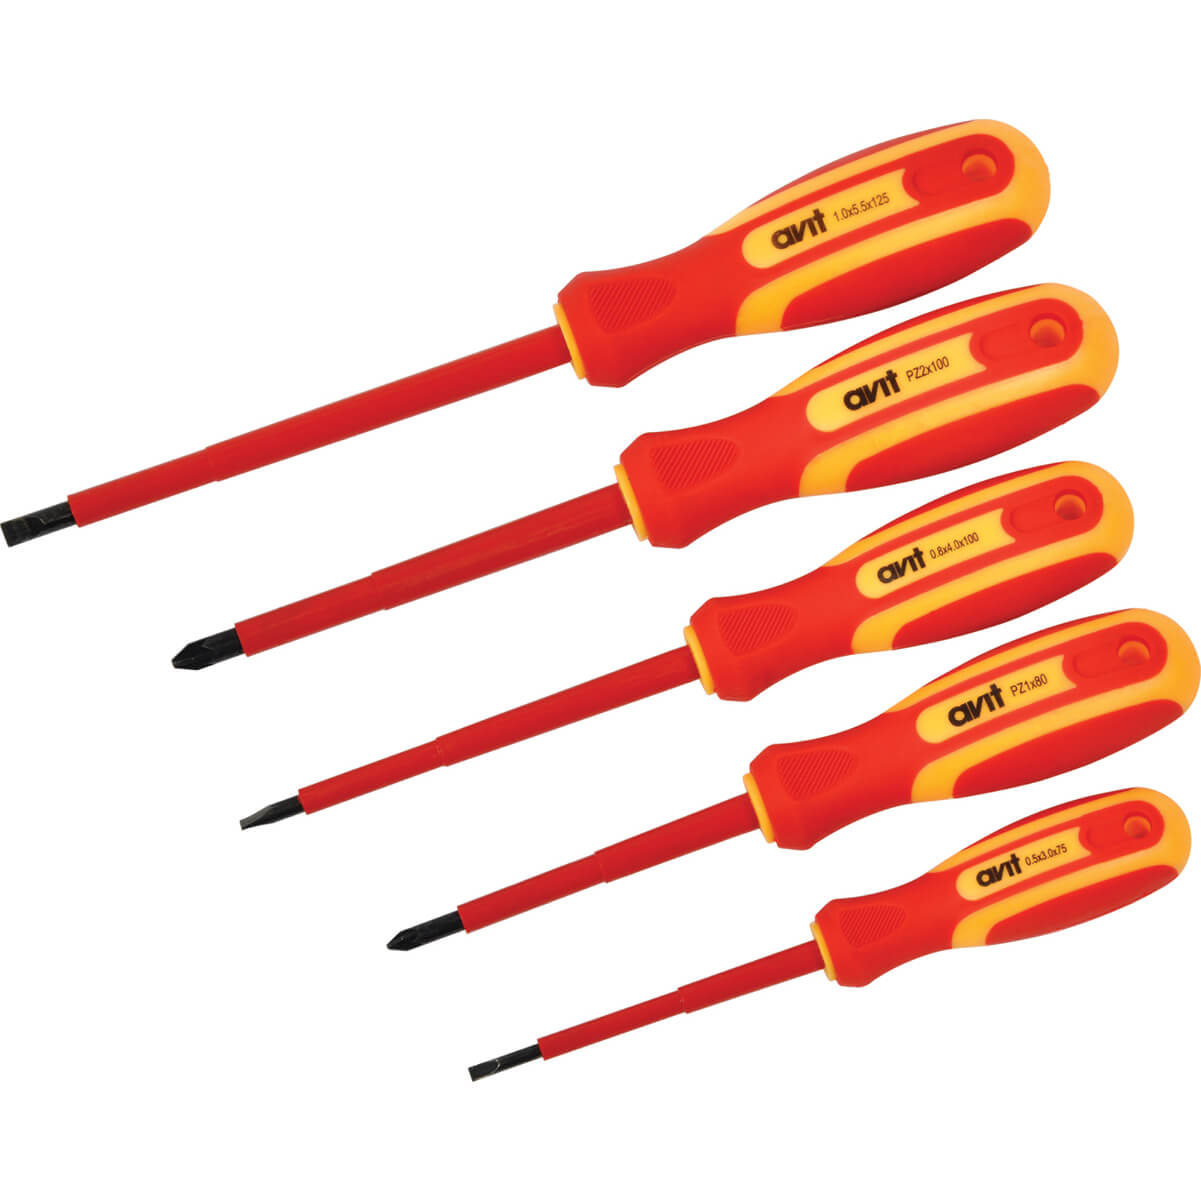 Image of Avit 5 Piece Insulated Pozi and Slotted Screwdriver Set